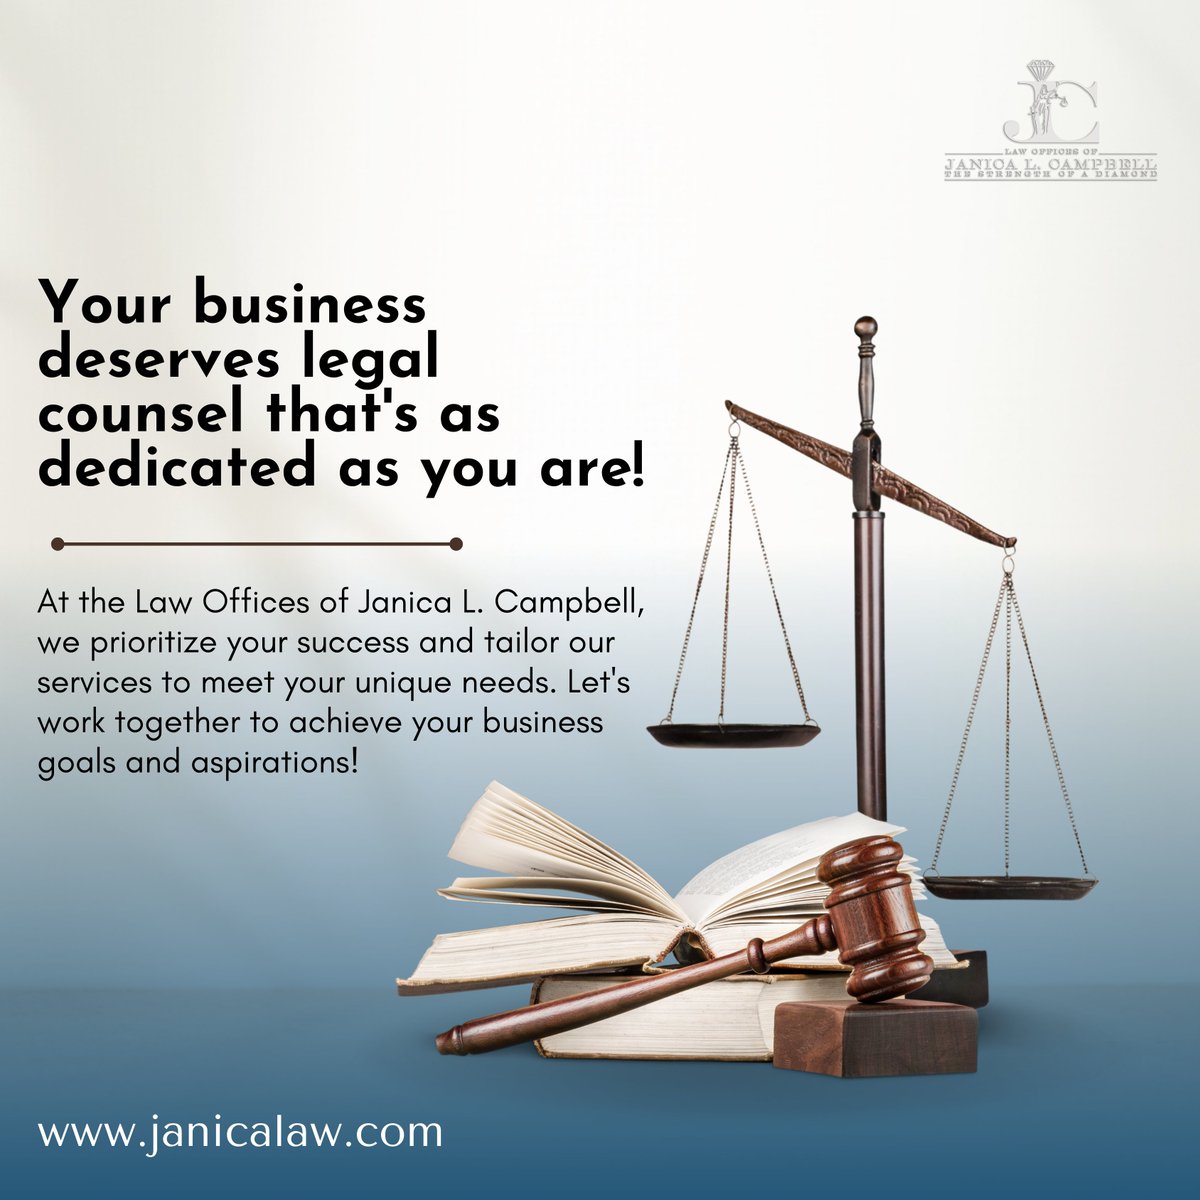 📚 Your business deserves legal counsel that's as dedicated as you are! 💼 At the Law Offices of Janica L. Campbell, we prioritize your success and tailor our services to meet your unique needs.

#LegalAdvice #BusinessLaw #LawFirm #Entrepreneurship #SmallBusiness #JanicaLaw